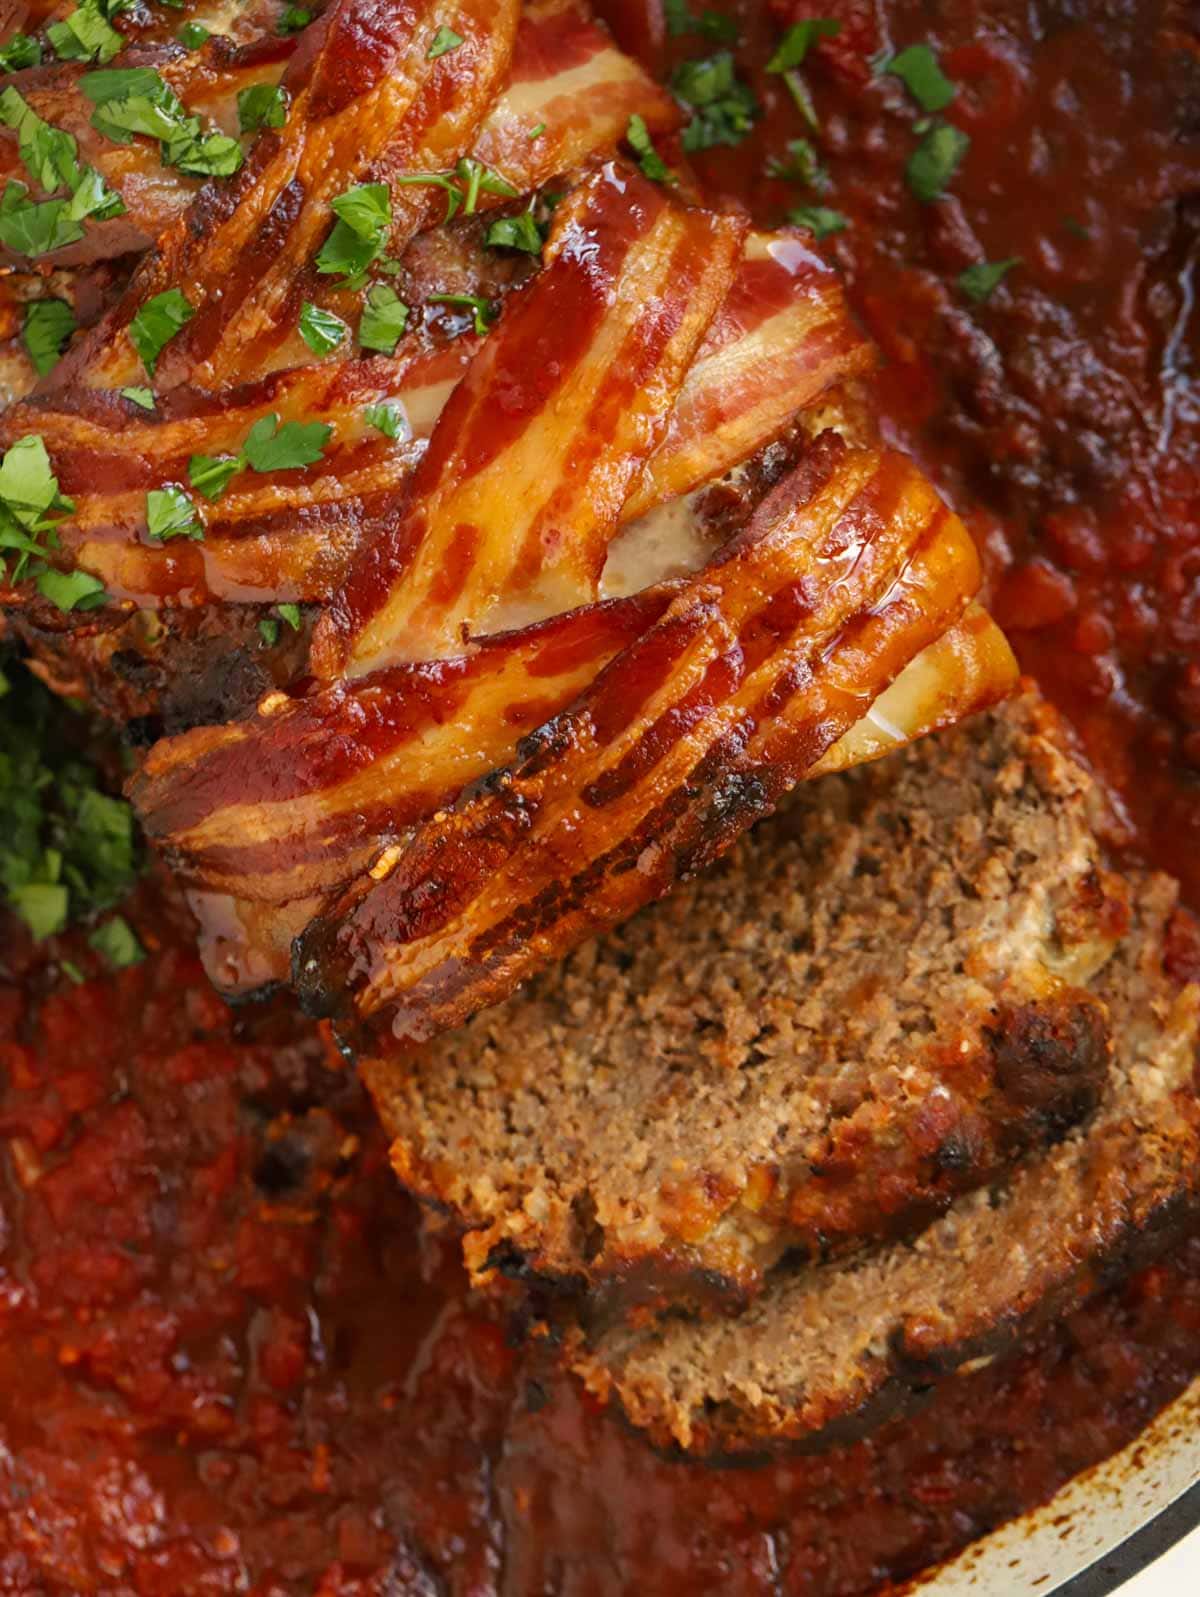 Finished meatloaf out of the oven in a rich sauce and topped with crispy bacon.